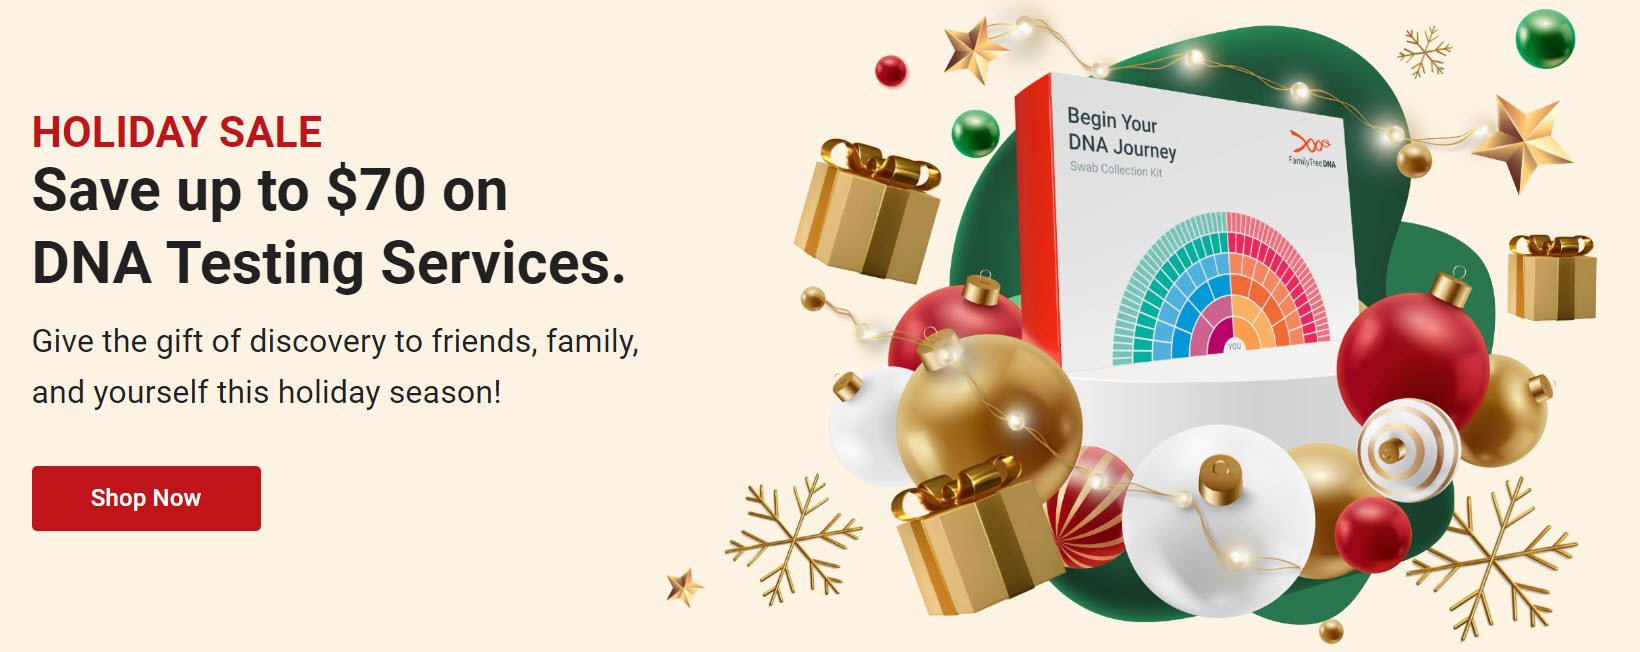 Save on ALL DNA test kits at FamilyTreeDNA!  FamilyTreeDNA is holding an AMAZING Holiday Sale with some GREAT prices on DNA test kits and bundles! Save up to $70 on DNA Testing Services and give the gift of discovery to friends, family, and yourself this holiday season!